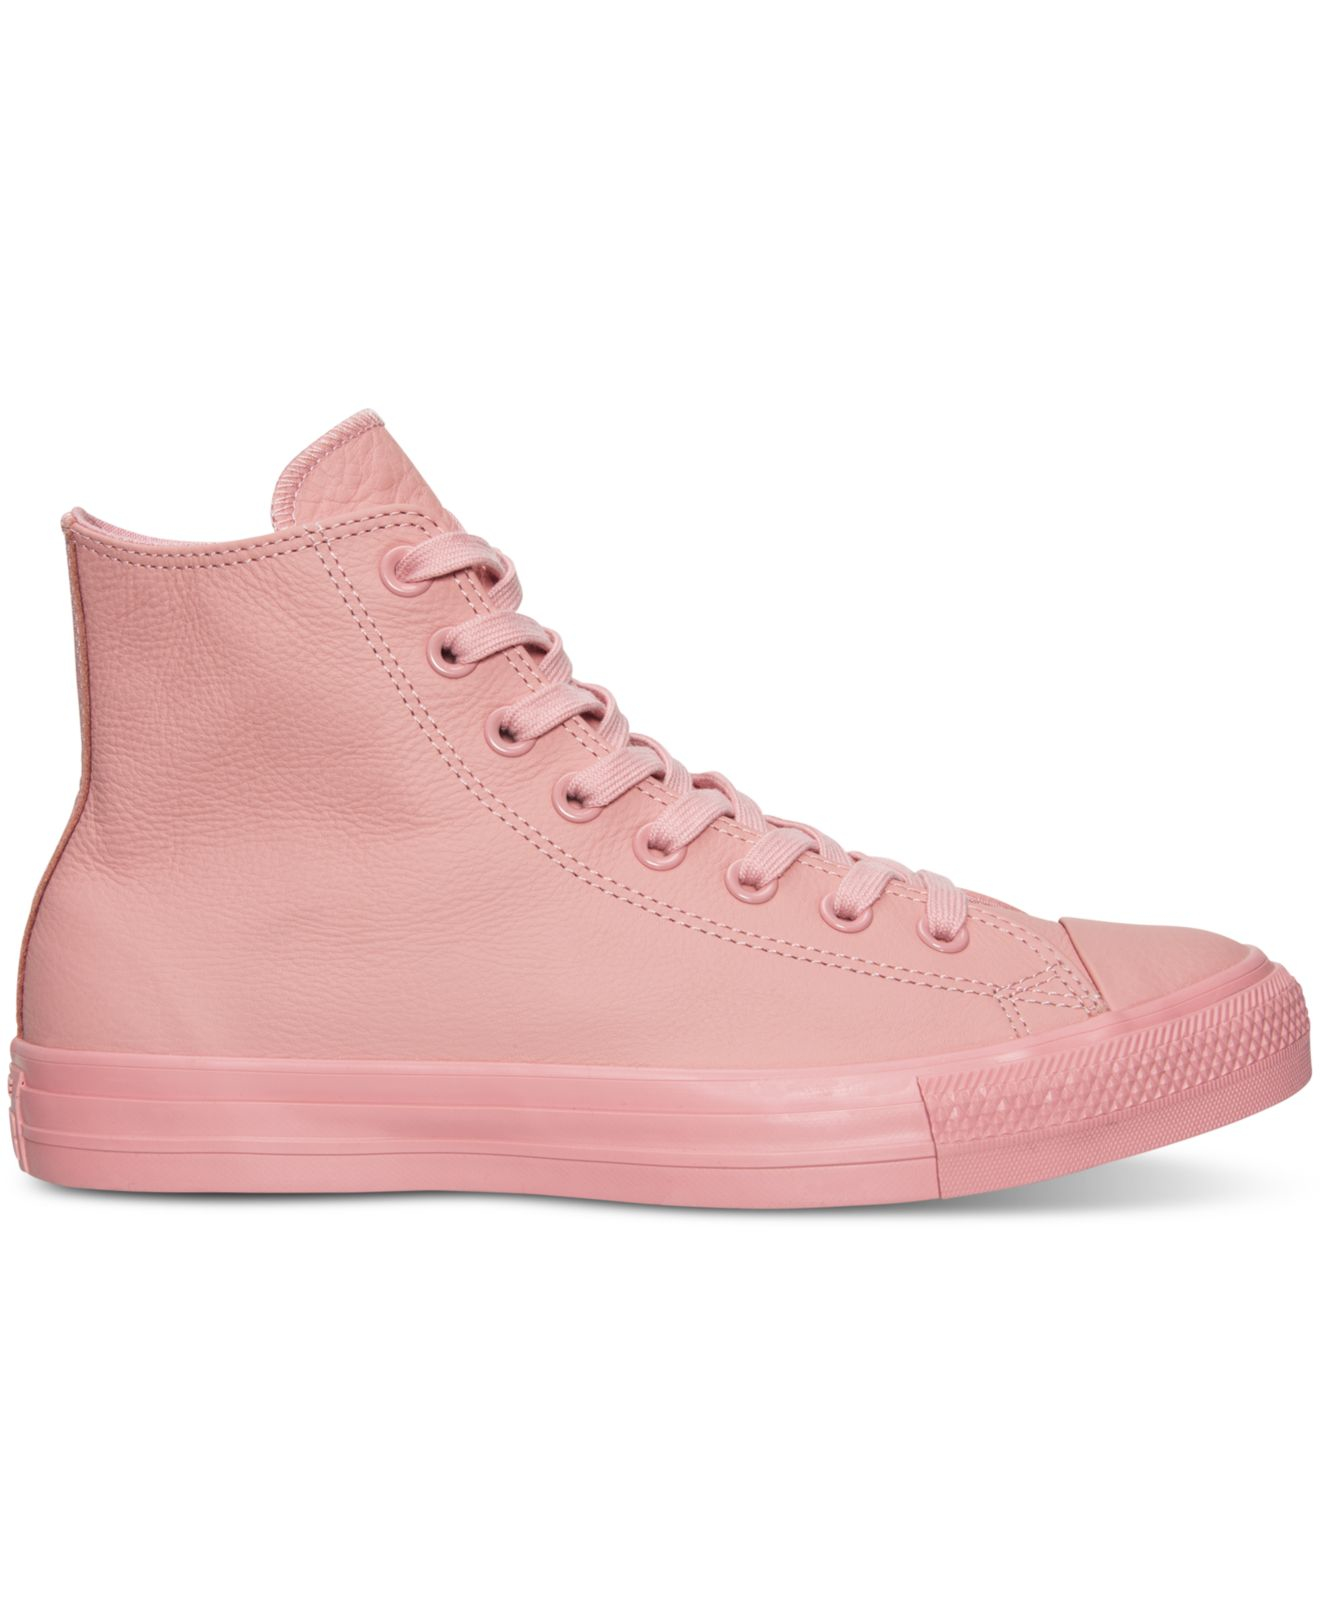 pink leather high top converse